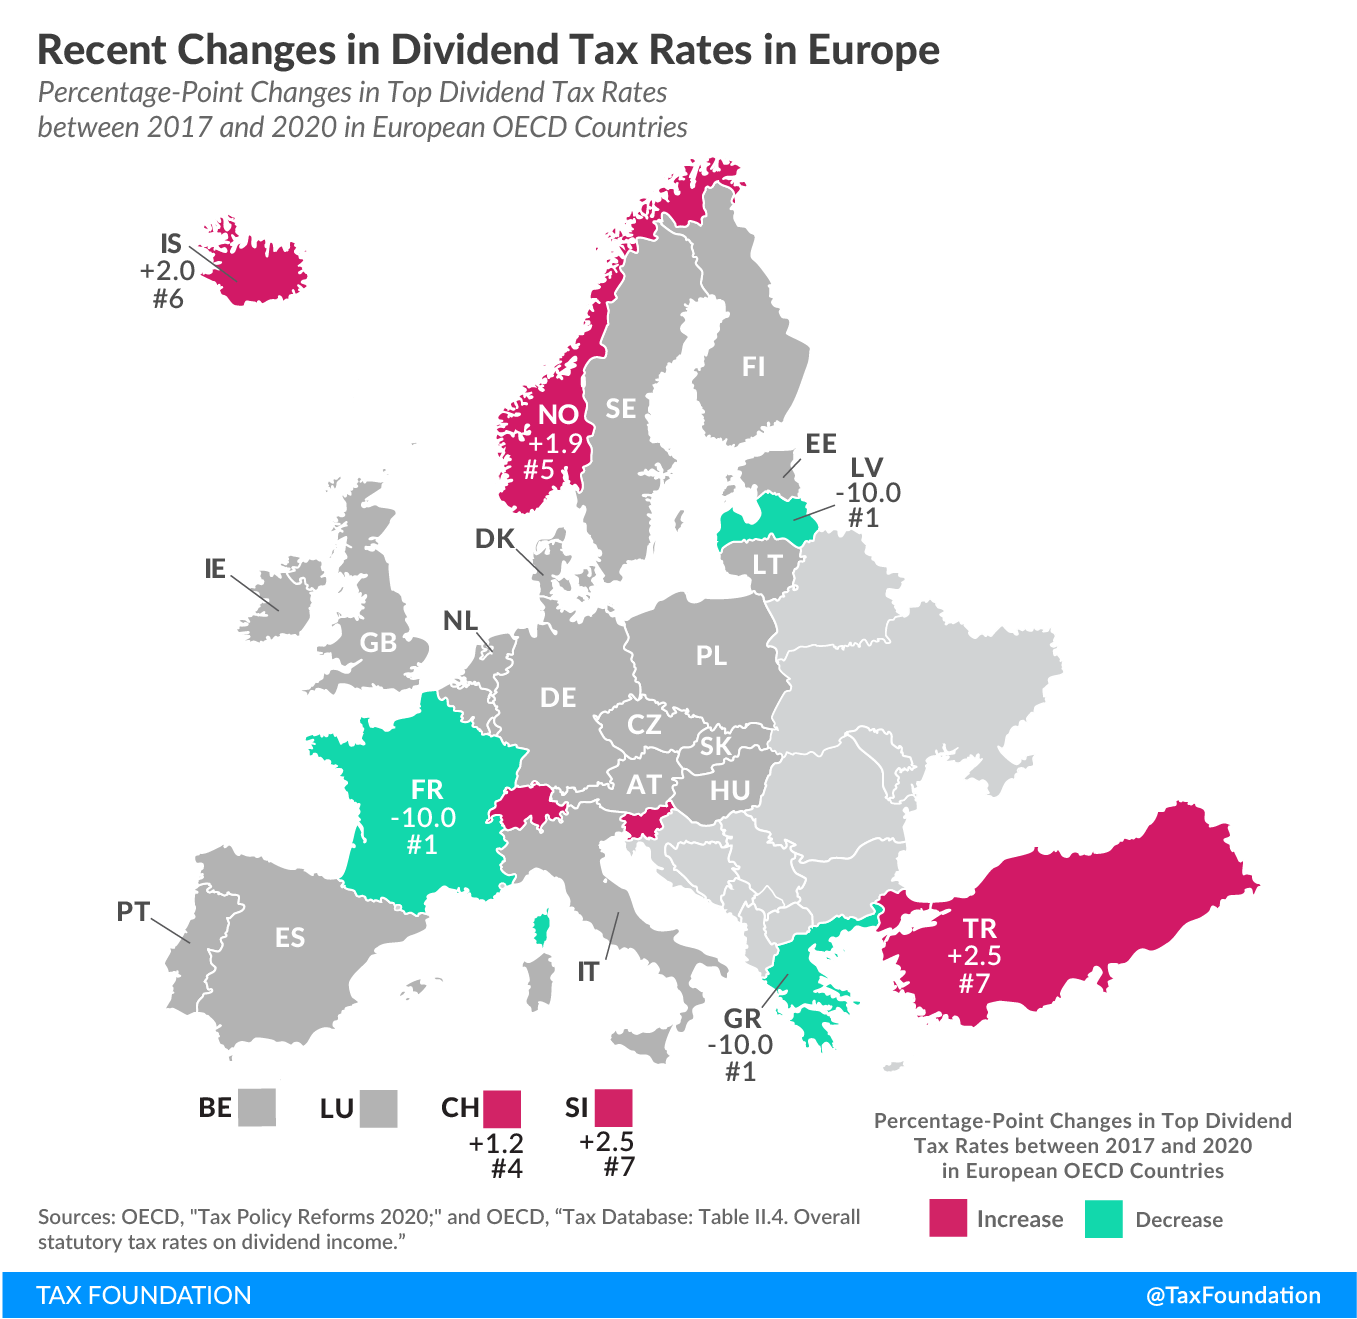 Recent changes in top dividend tax rates in Europe 2020